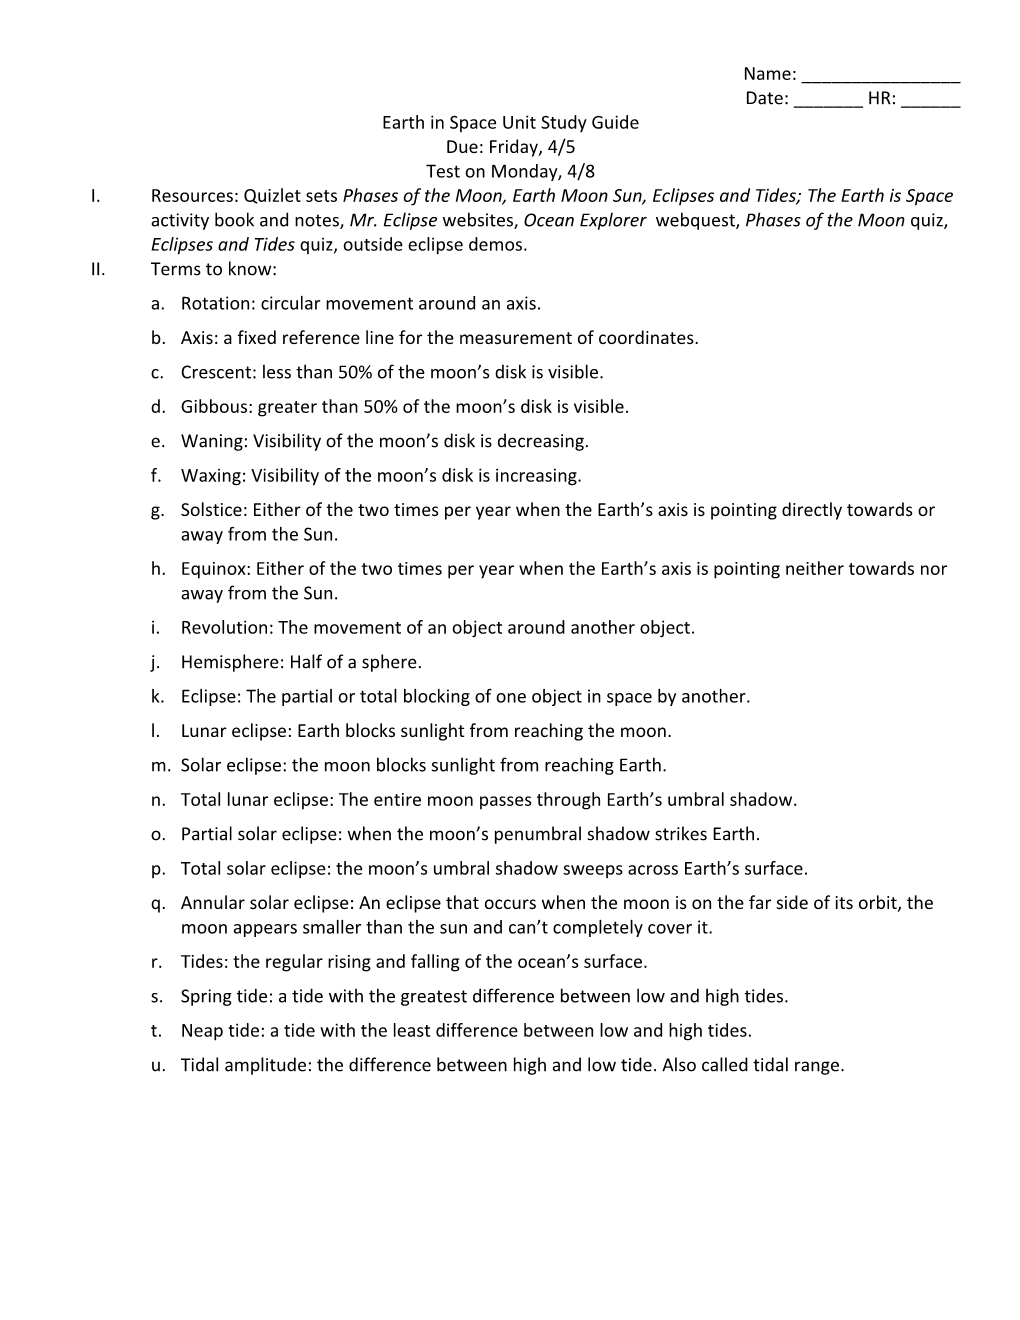 Earth in Space Unit Study Guide